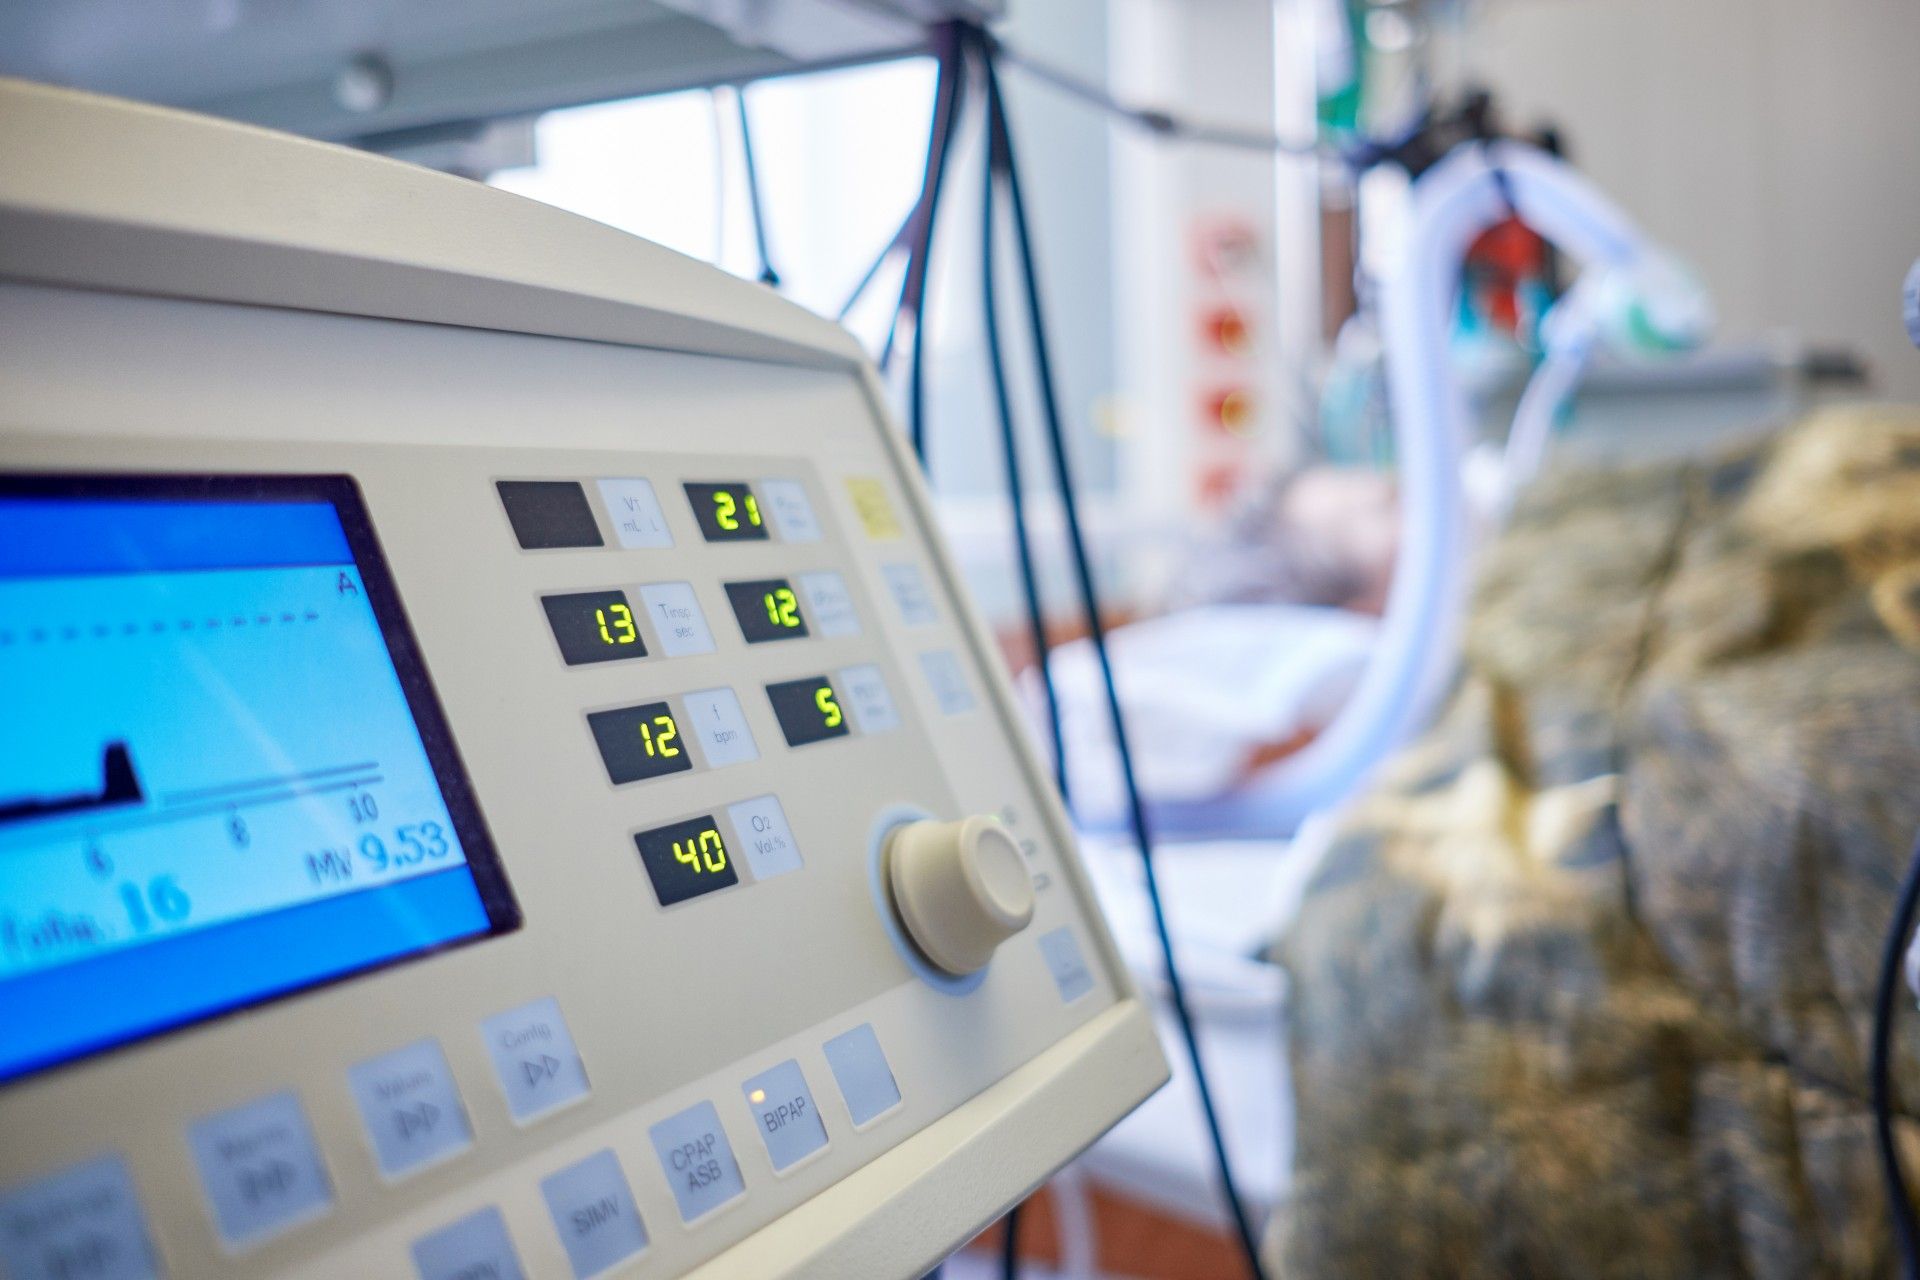 A ventilator in the foreground with a patient hooked up to it lying in a bed in the background - ventilators